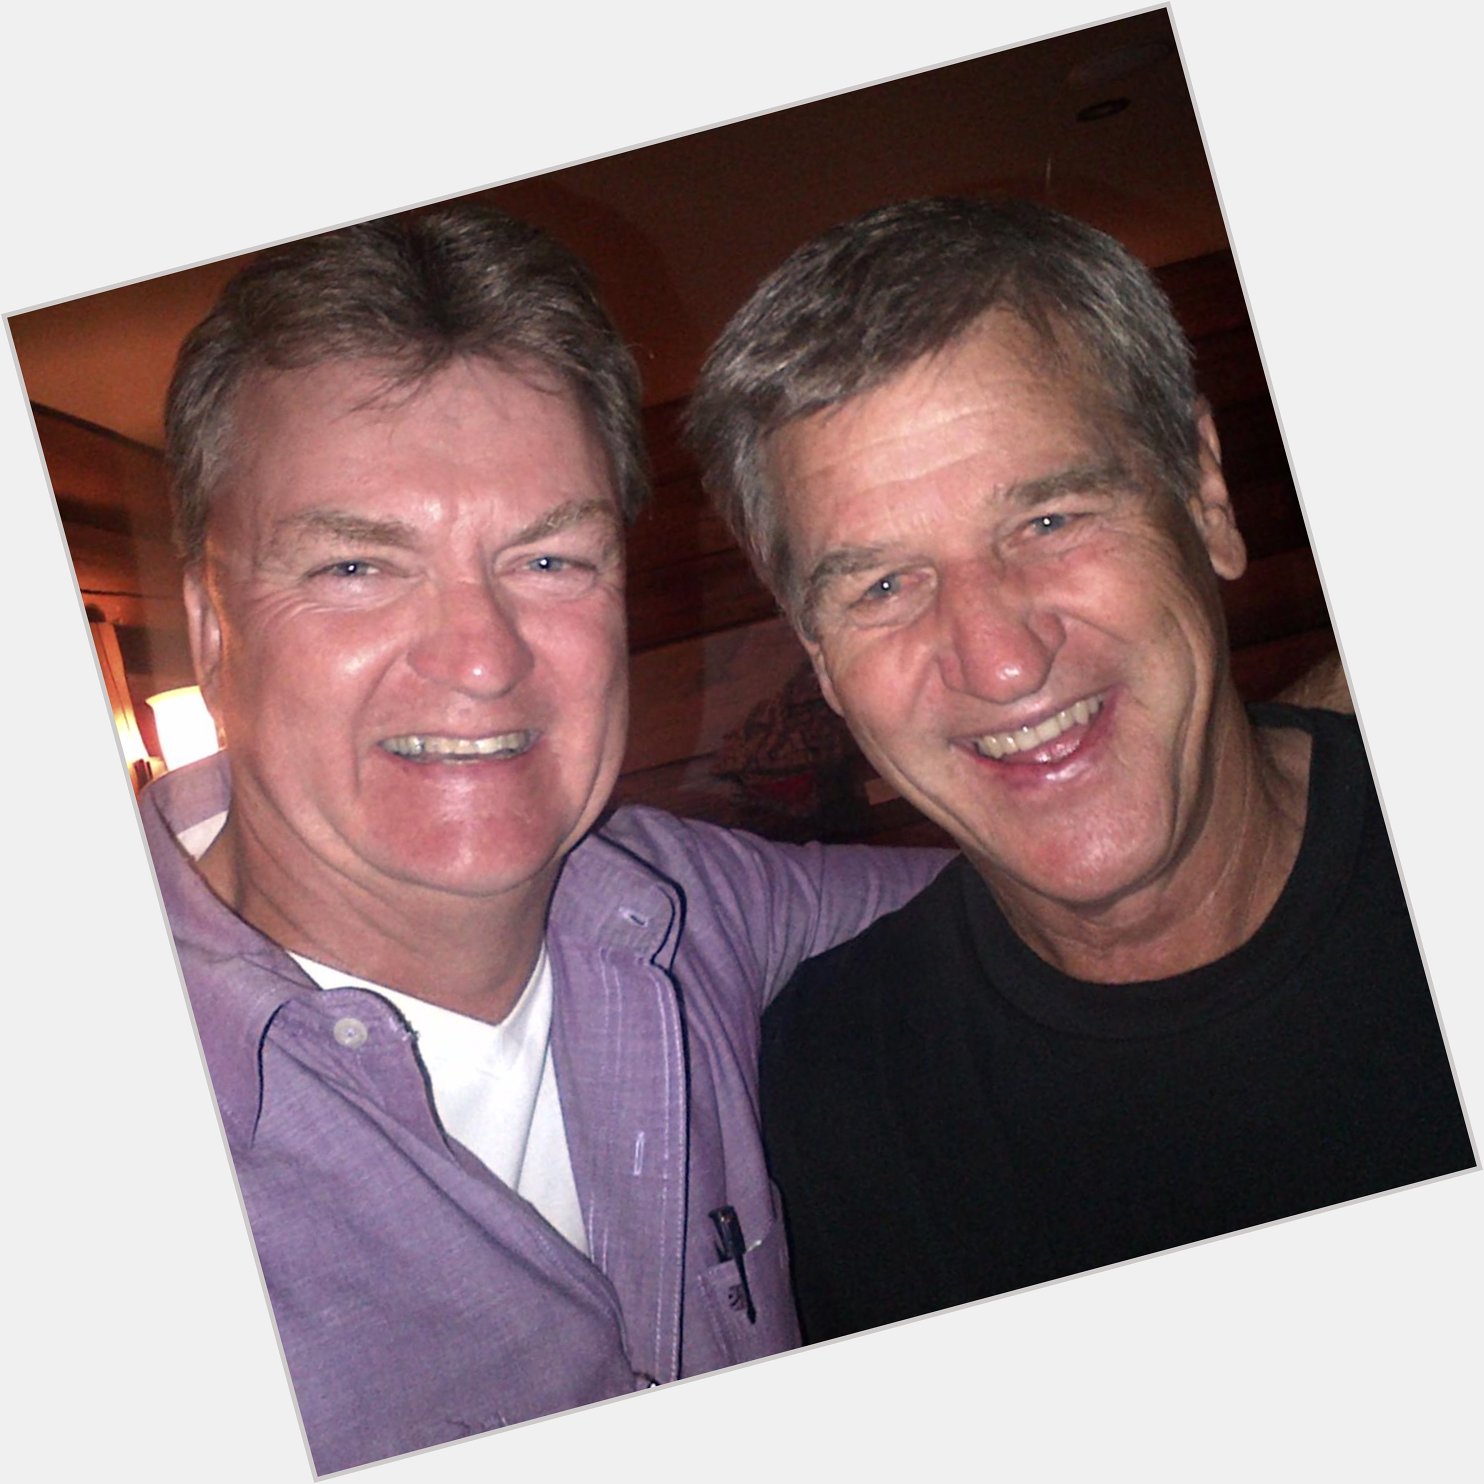 Happy birthday to the greatest to ever play hockey;Number 4,Bobby Orr. Skate, shoot, pass, hit, fight, compete; 